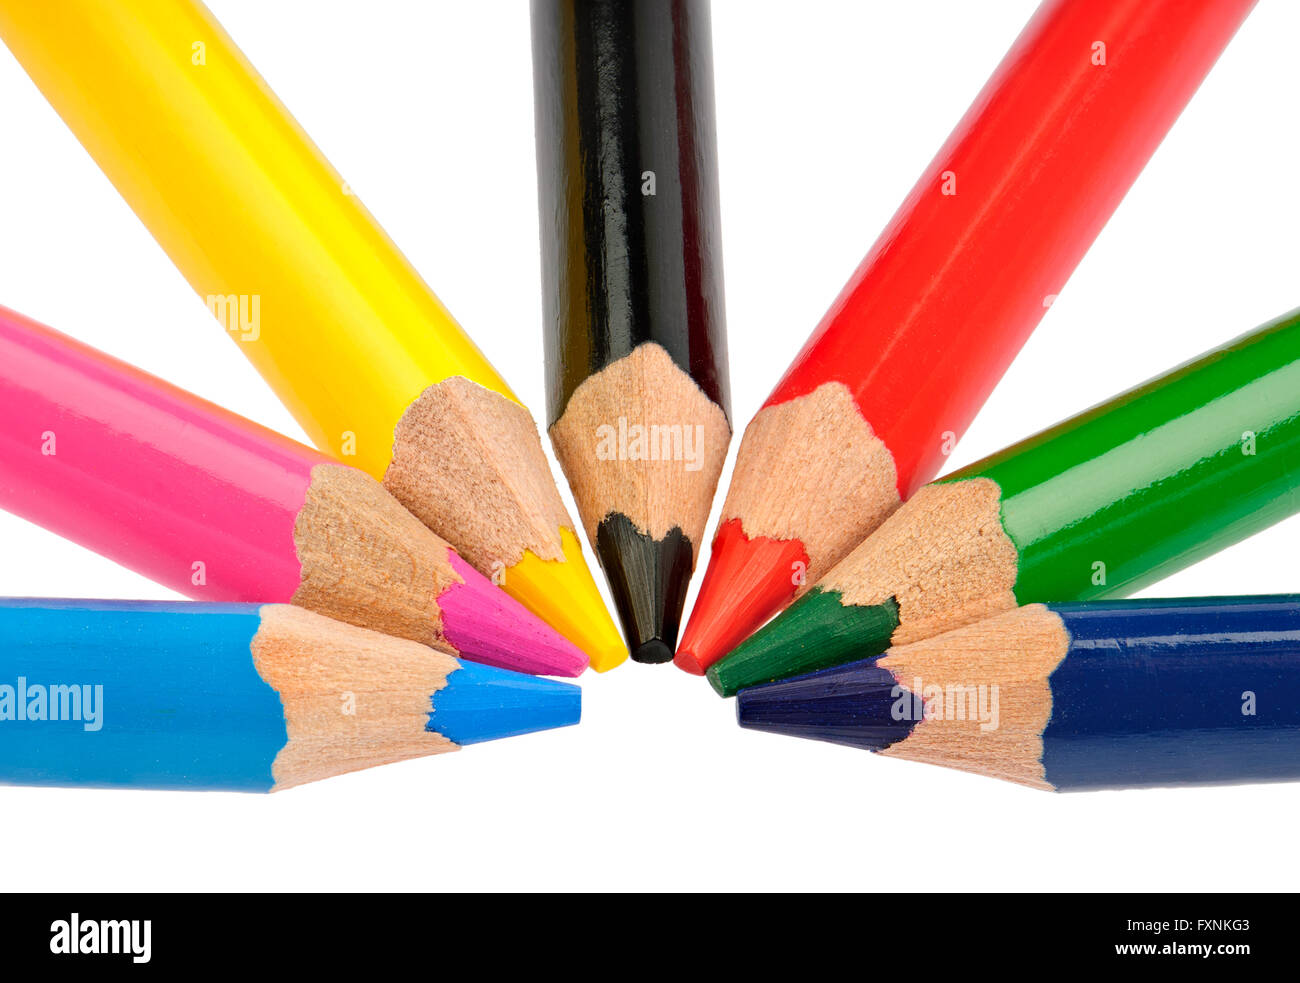 4 crayons in basic colors CMYK and RGB, isolated on white background Stock Photo